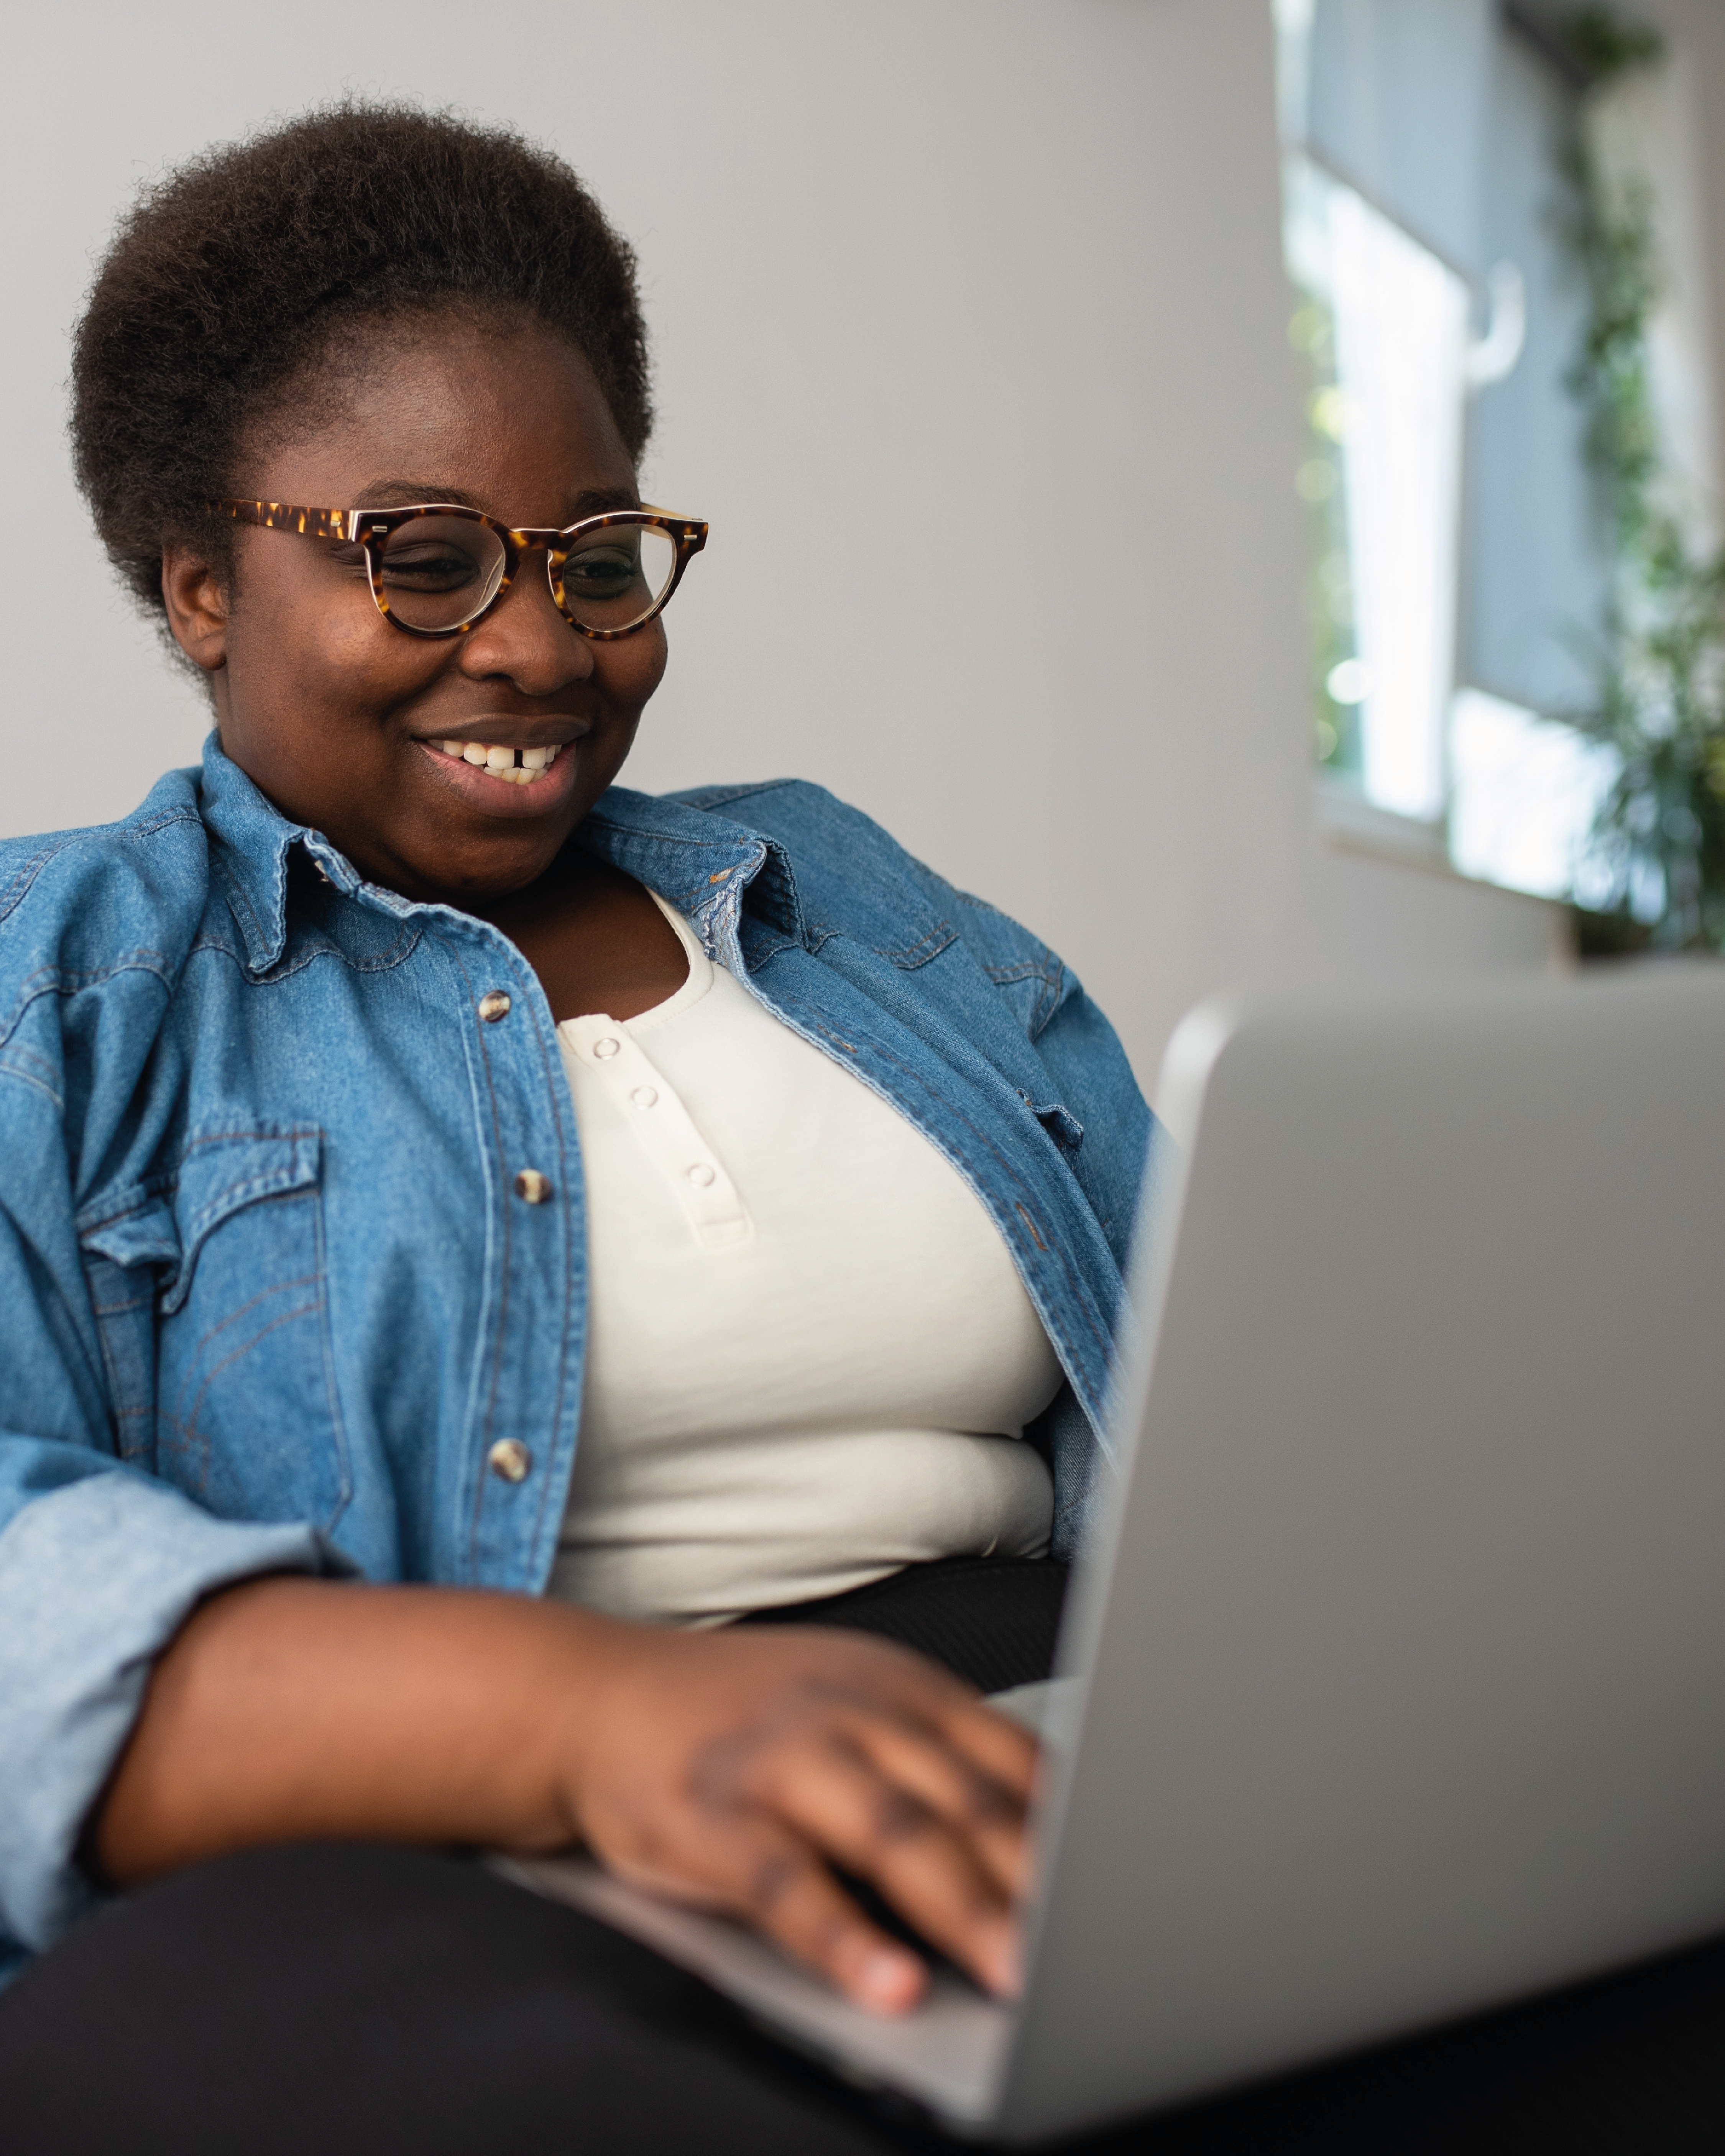 A Black person with short hair working on their laptop; they're wearing a white t-shirt, a denim shirt and glasses